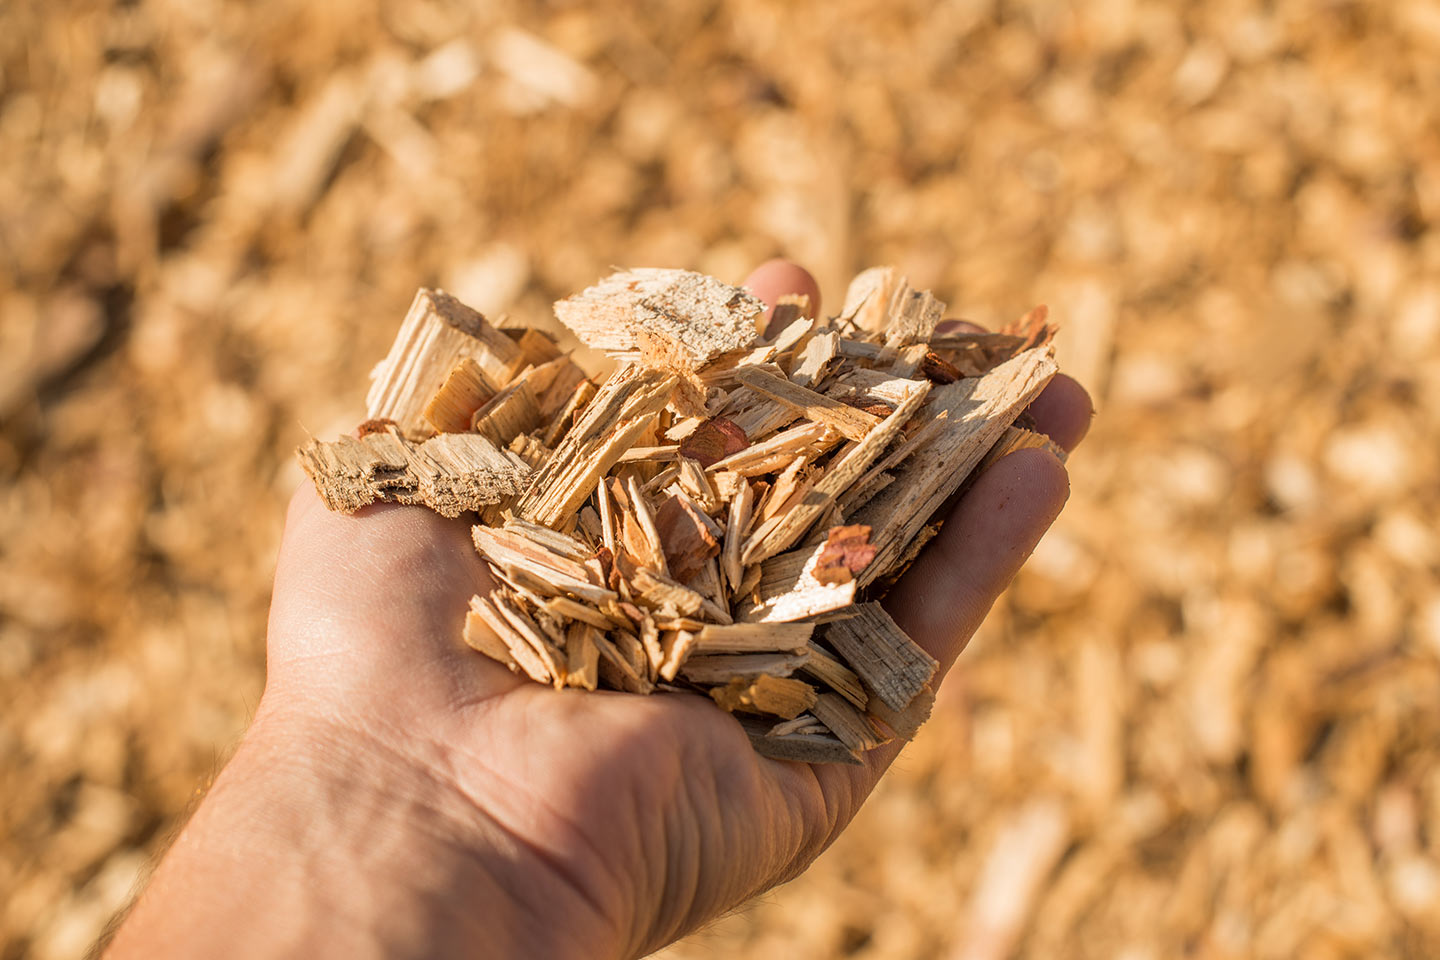 Wood chips for biomass manufactured in La Pine, Oregon.